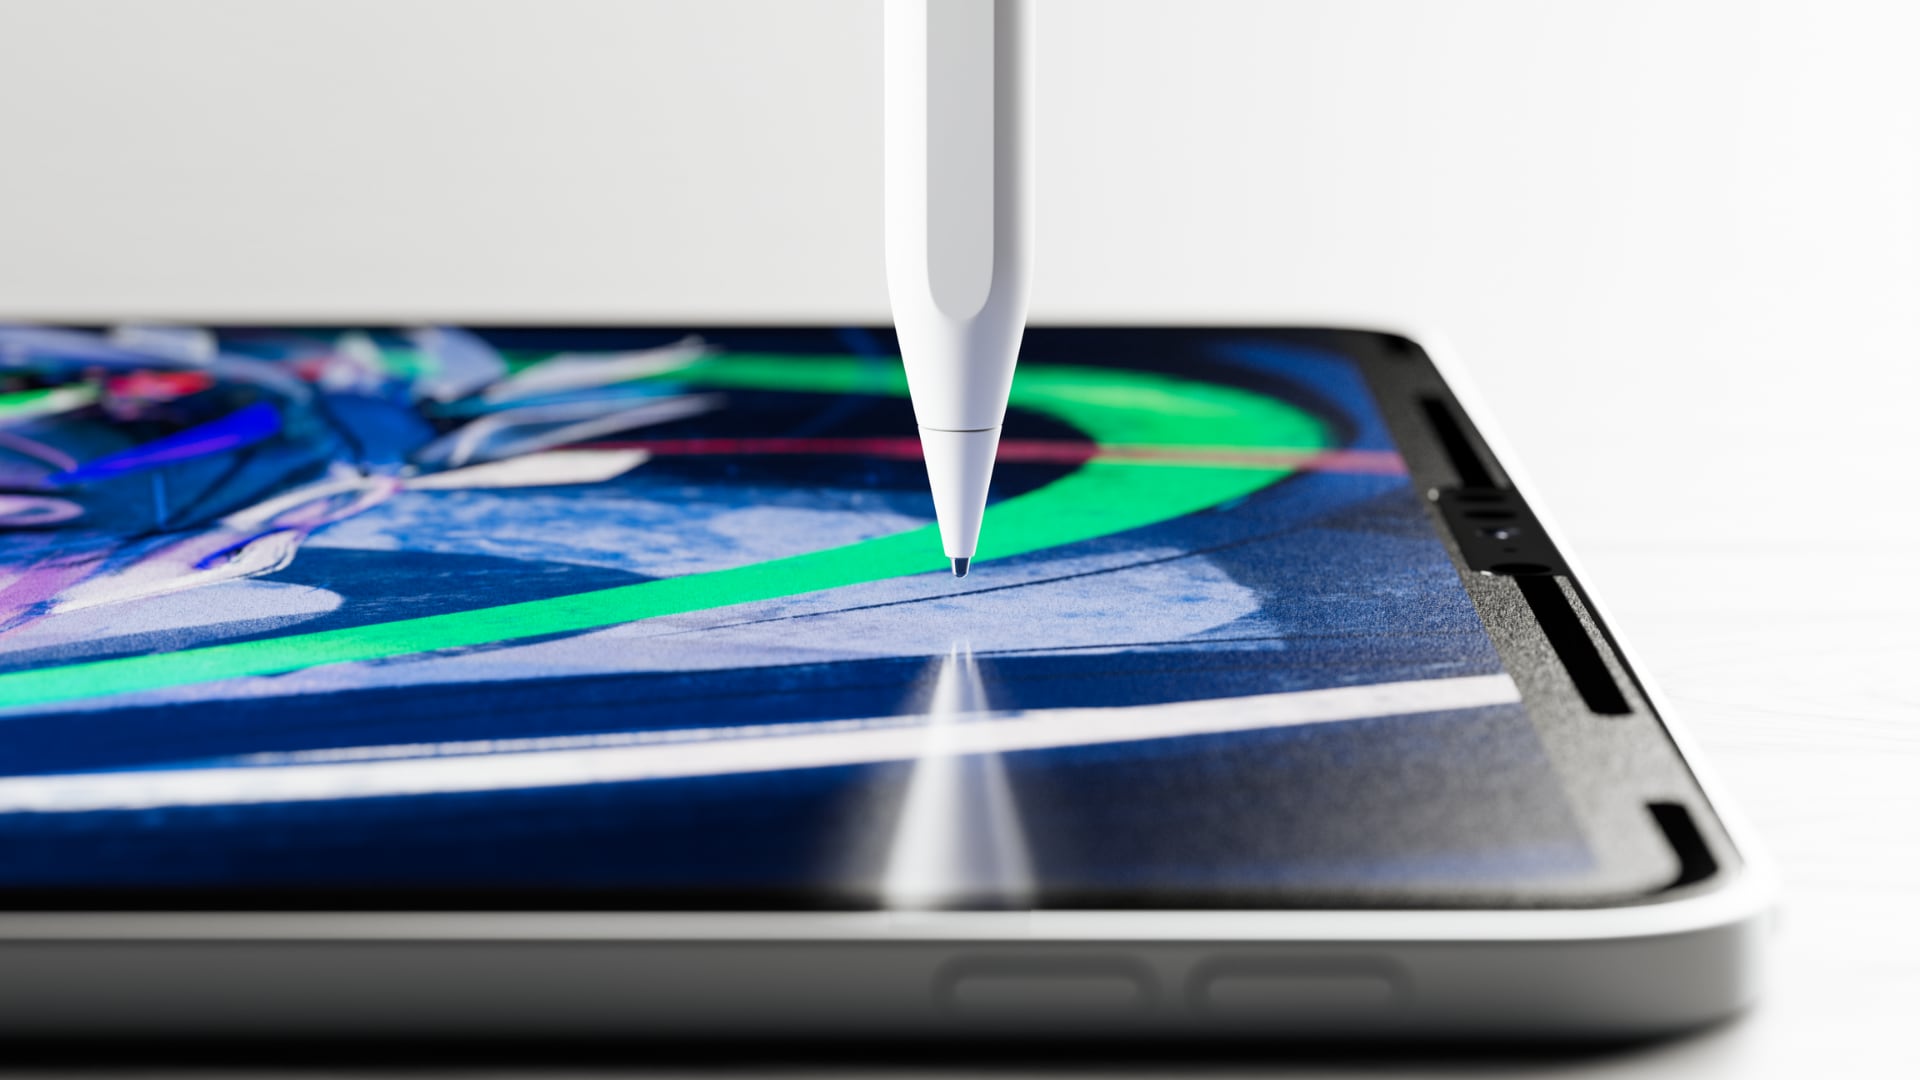 Astropad's Paper-Like Screen Protector and Apple Pencil Tip Works With M4 iPad Pro